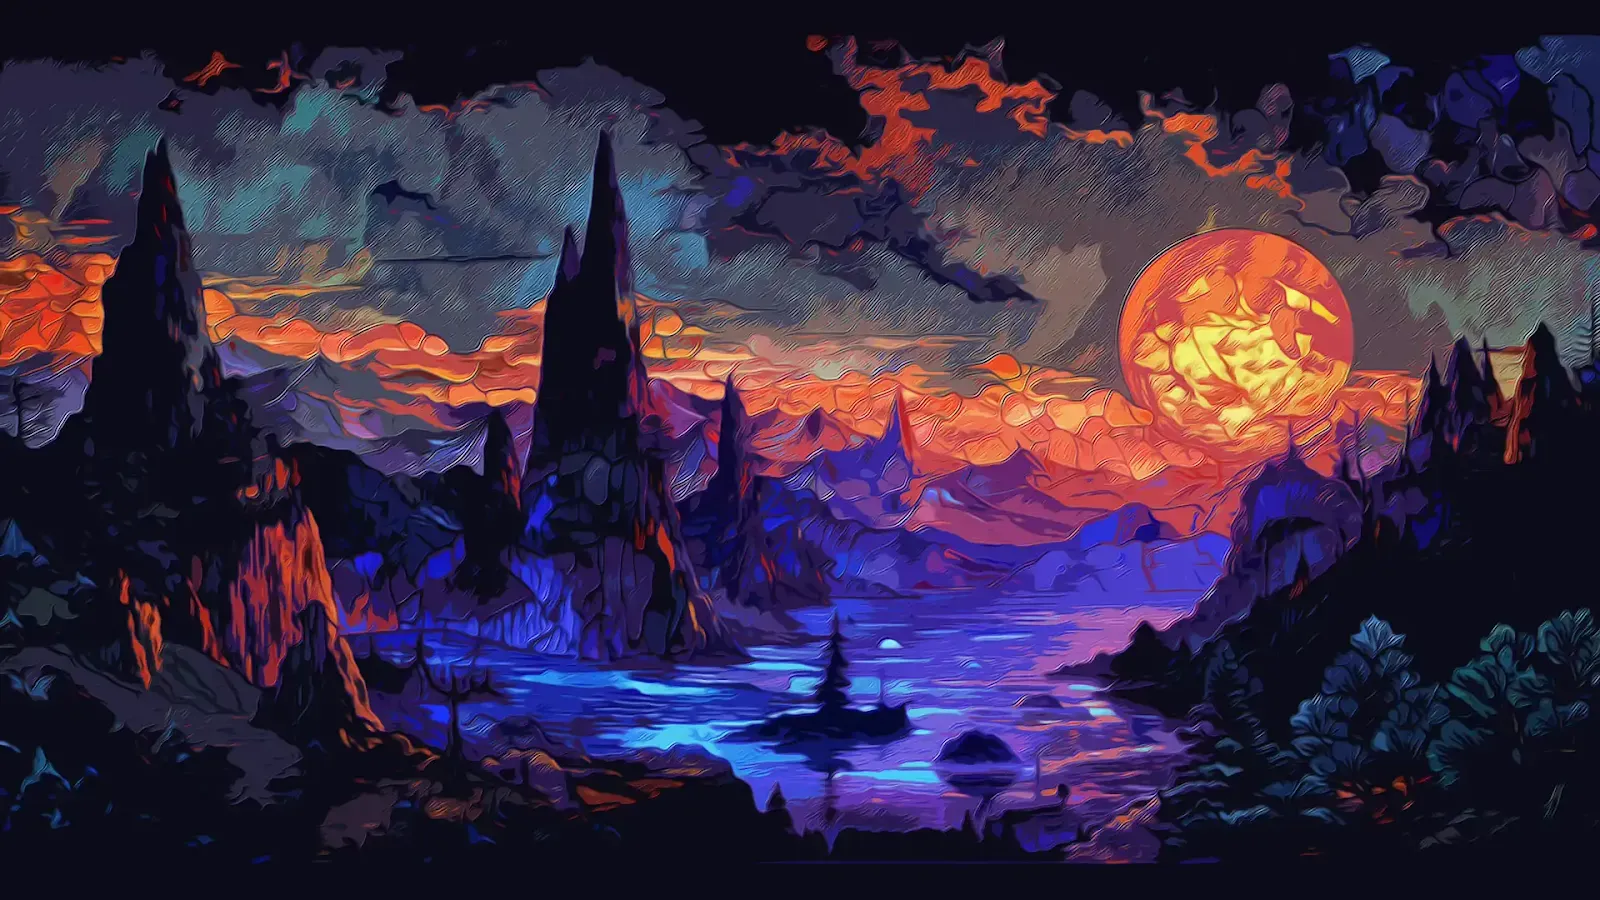 Stunning graphic illustration of a fantastical landscape with jagged mountains, a radiant full moon, and a river reflecting a myriad of colors under a twilight sky.